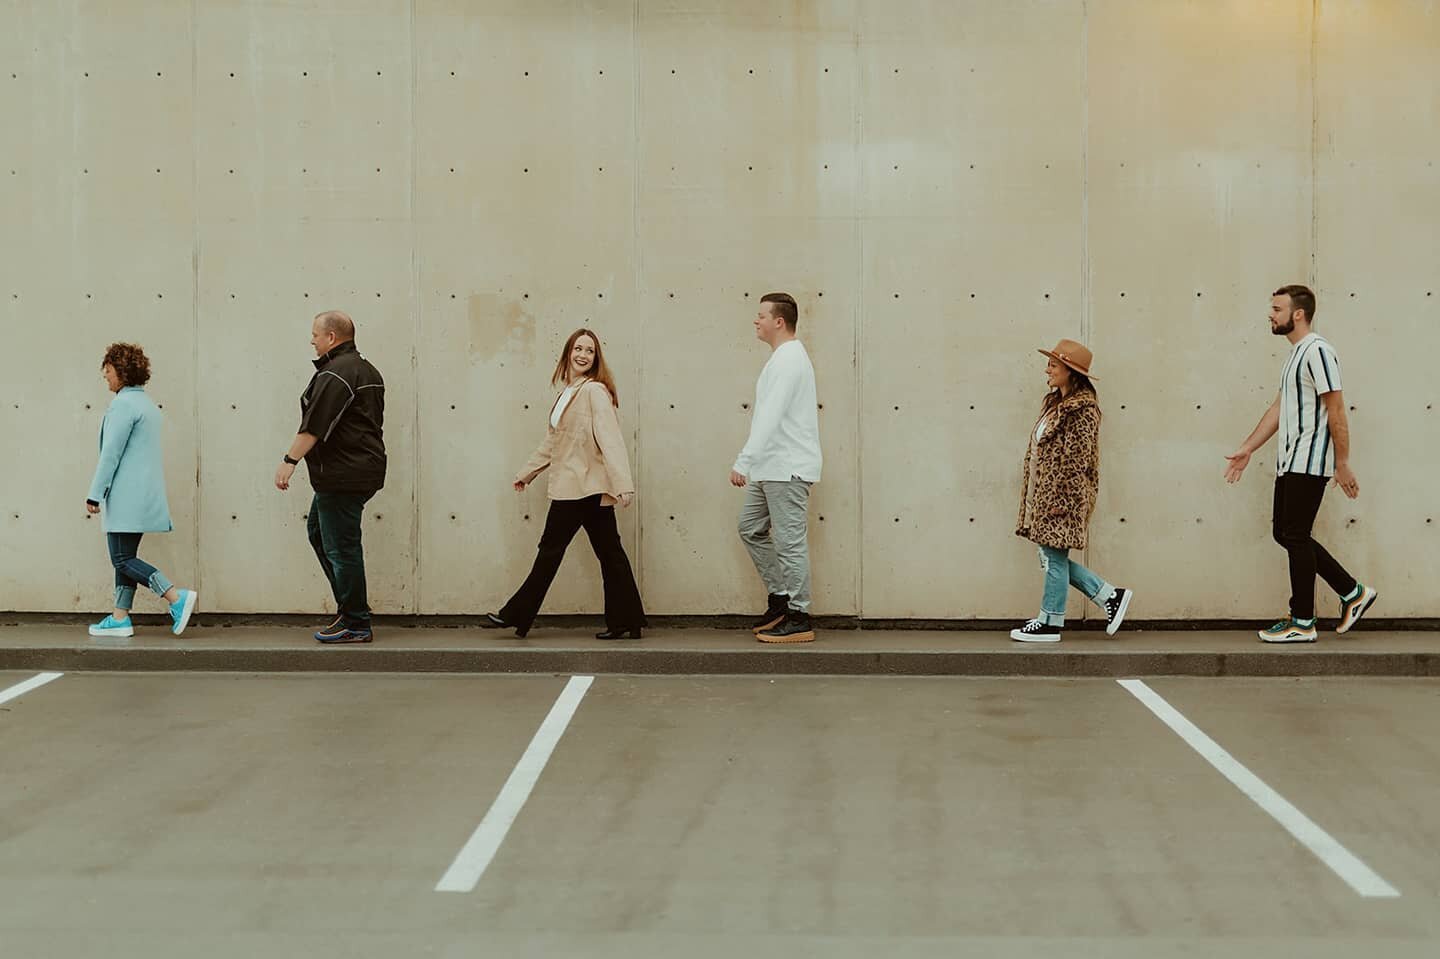 〰️
Seriously one of the coolest families I have ever had the pleasure of knowing - hilarious, thoughtful, loving, close-knit, &amp; definitely stylish.
&bull;
&bull;
&bull;
#familyphotos #lookslikefilm #familygoals #familysession #texasfamilyphotogra